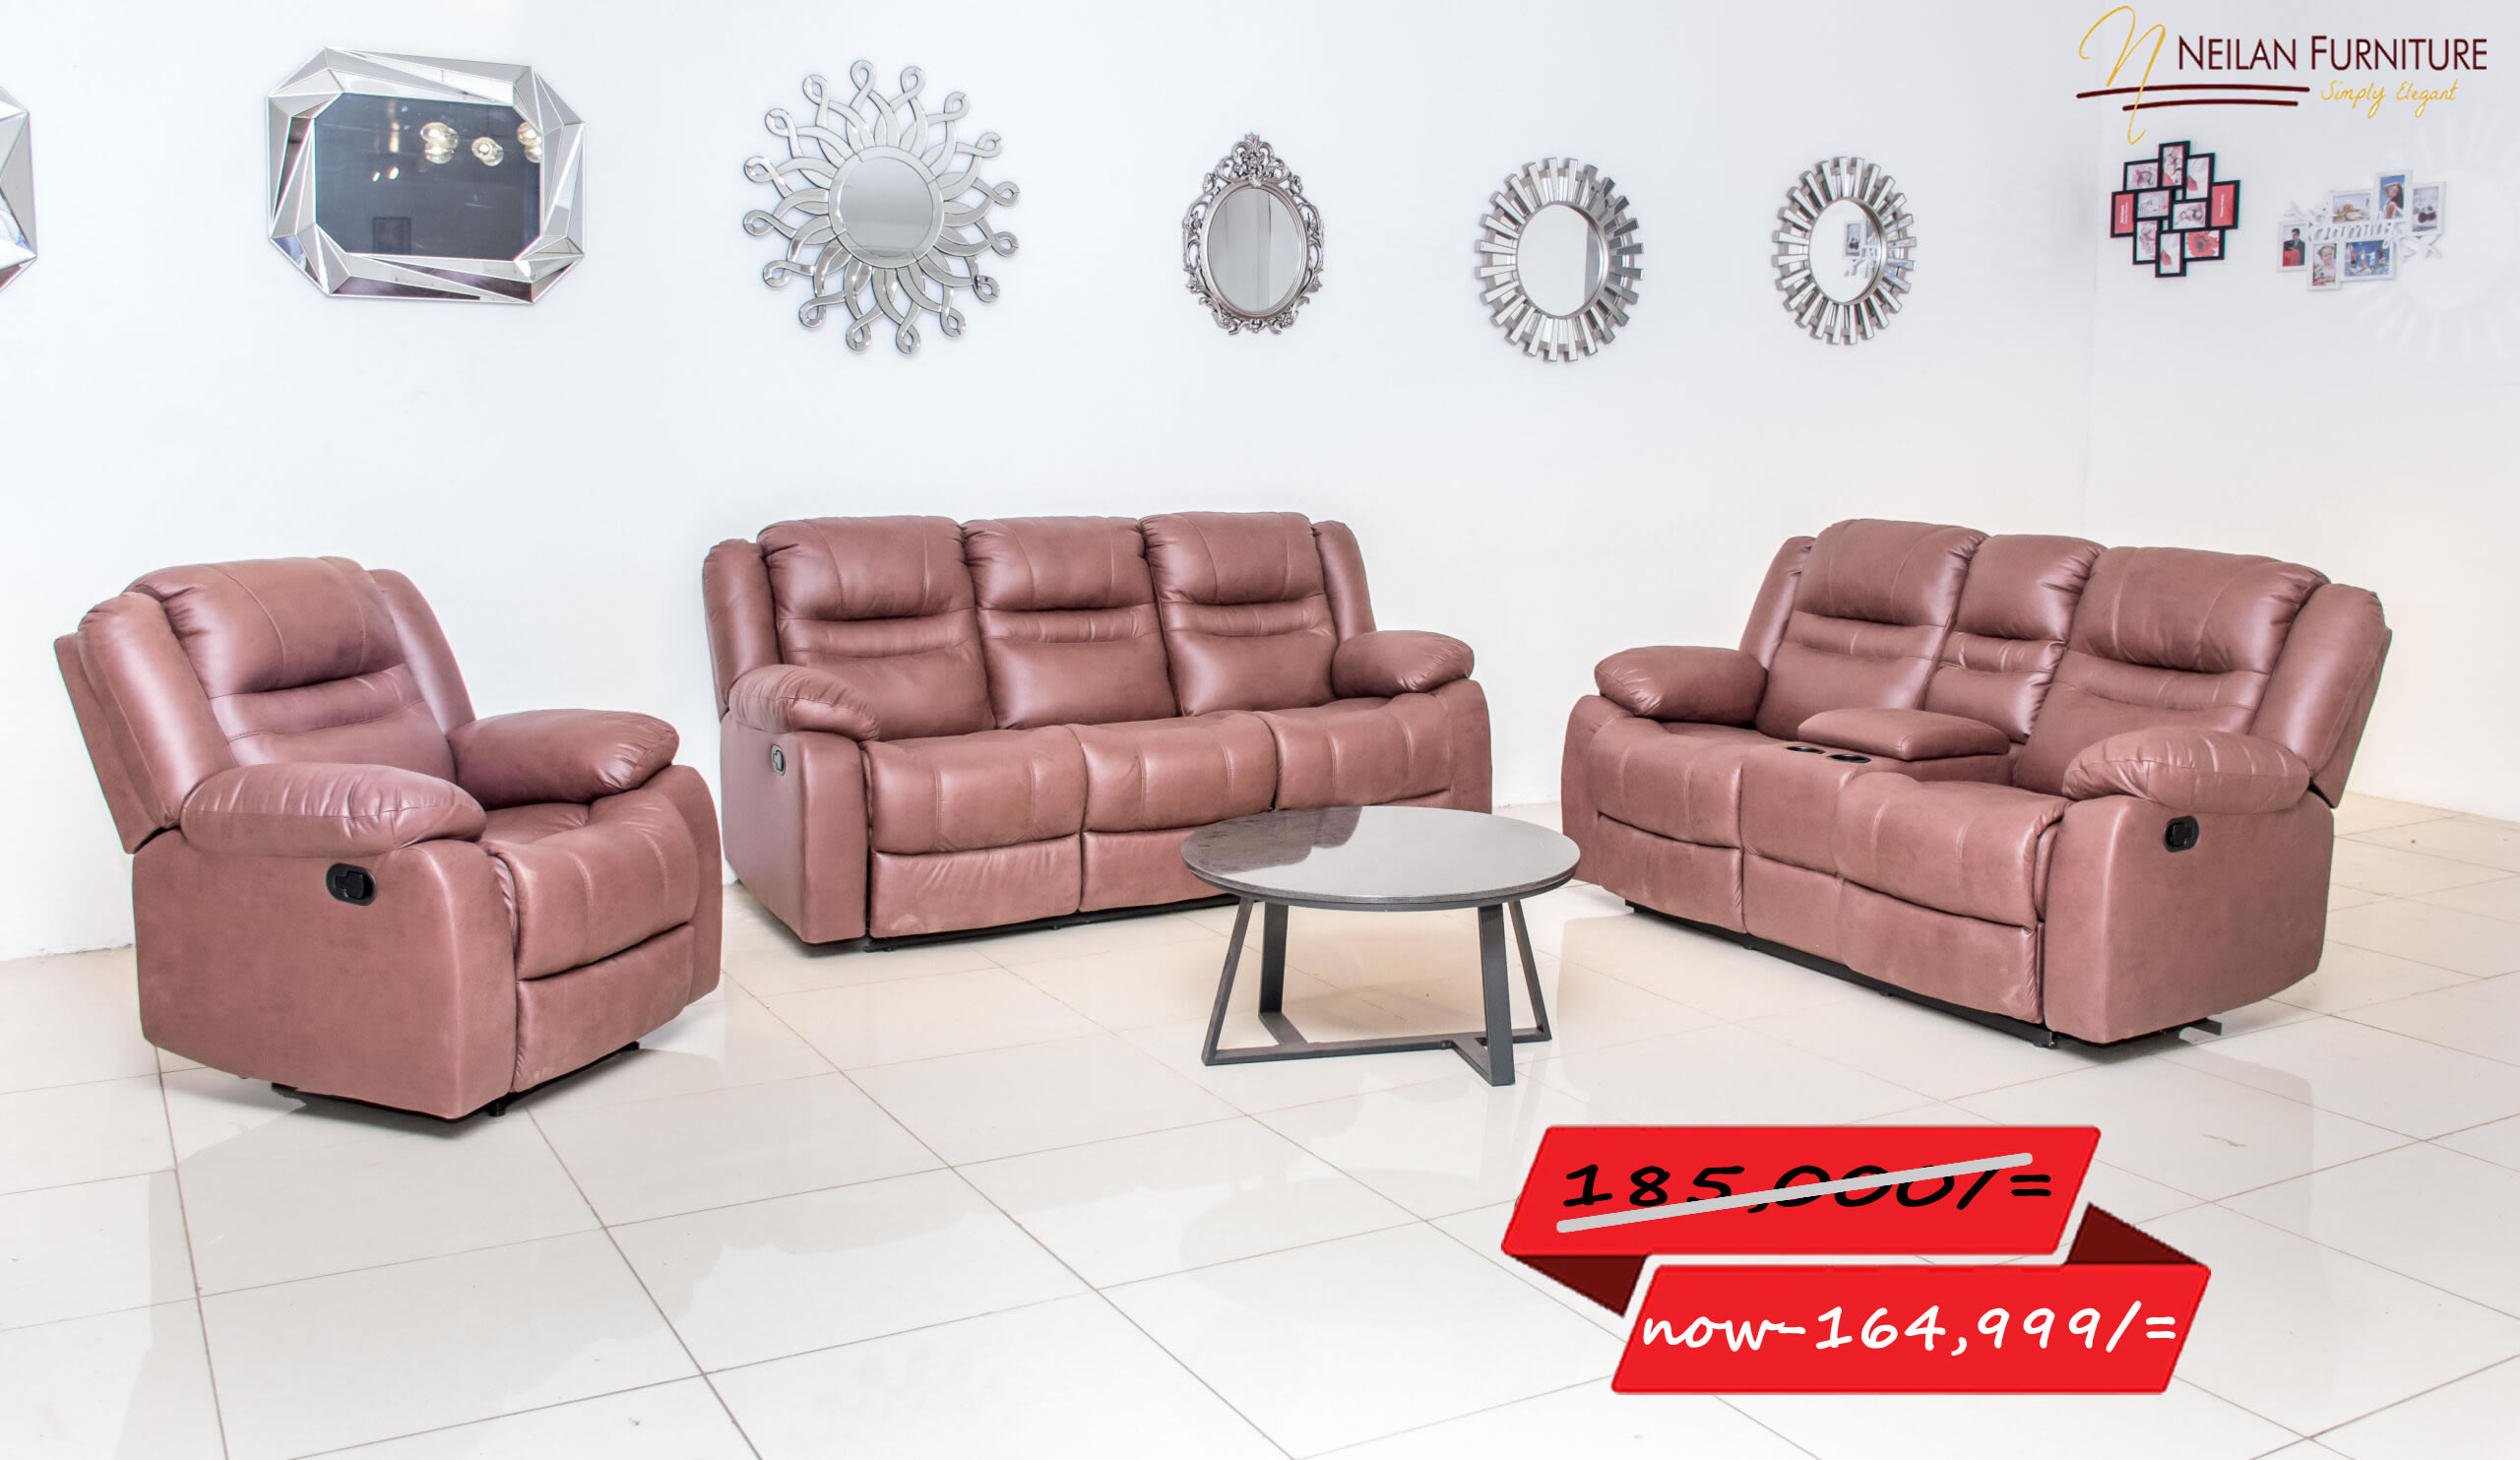 You are currently viewing Neilan Furniture Store in Kisumu